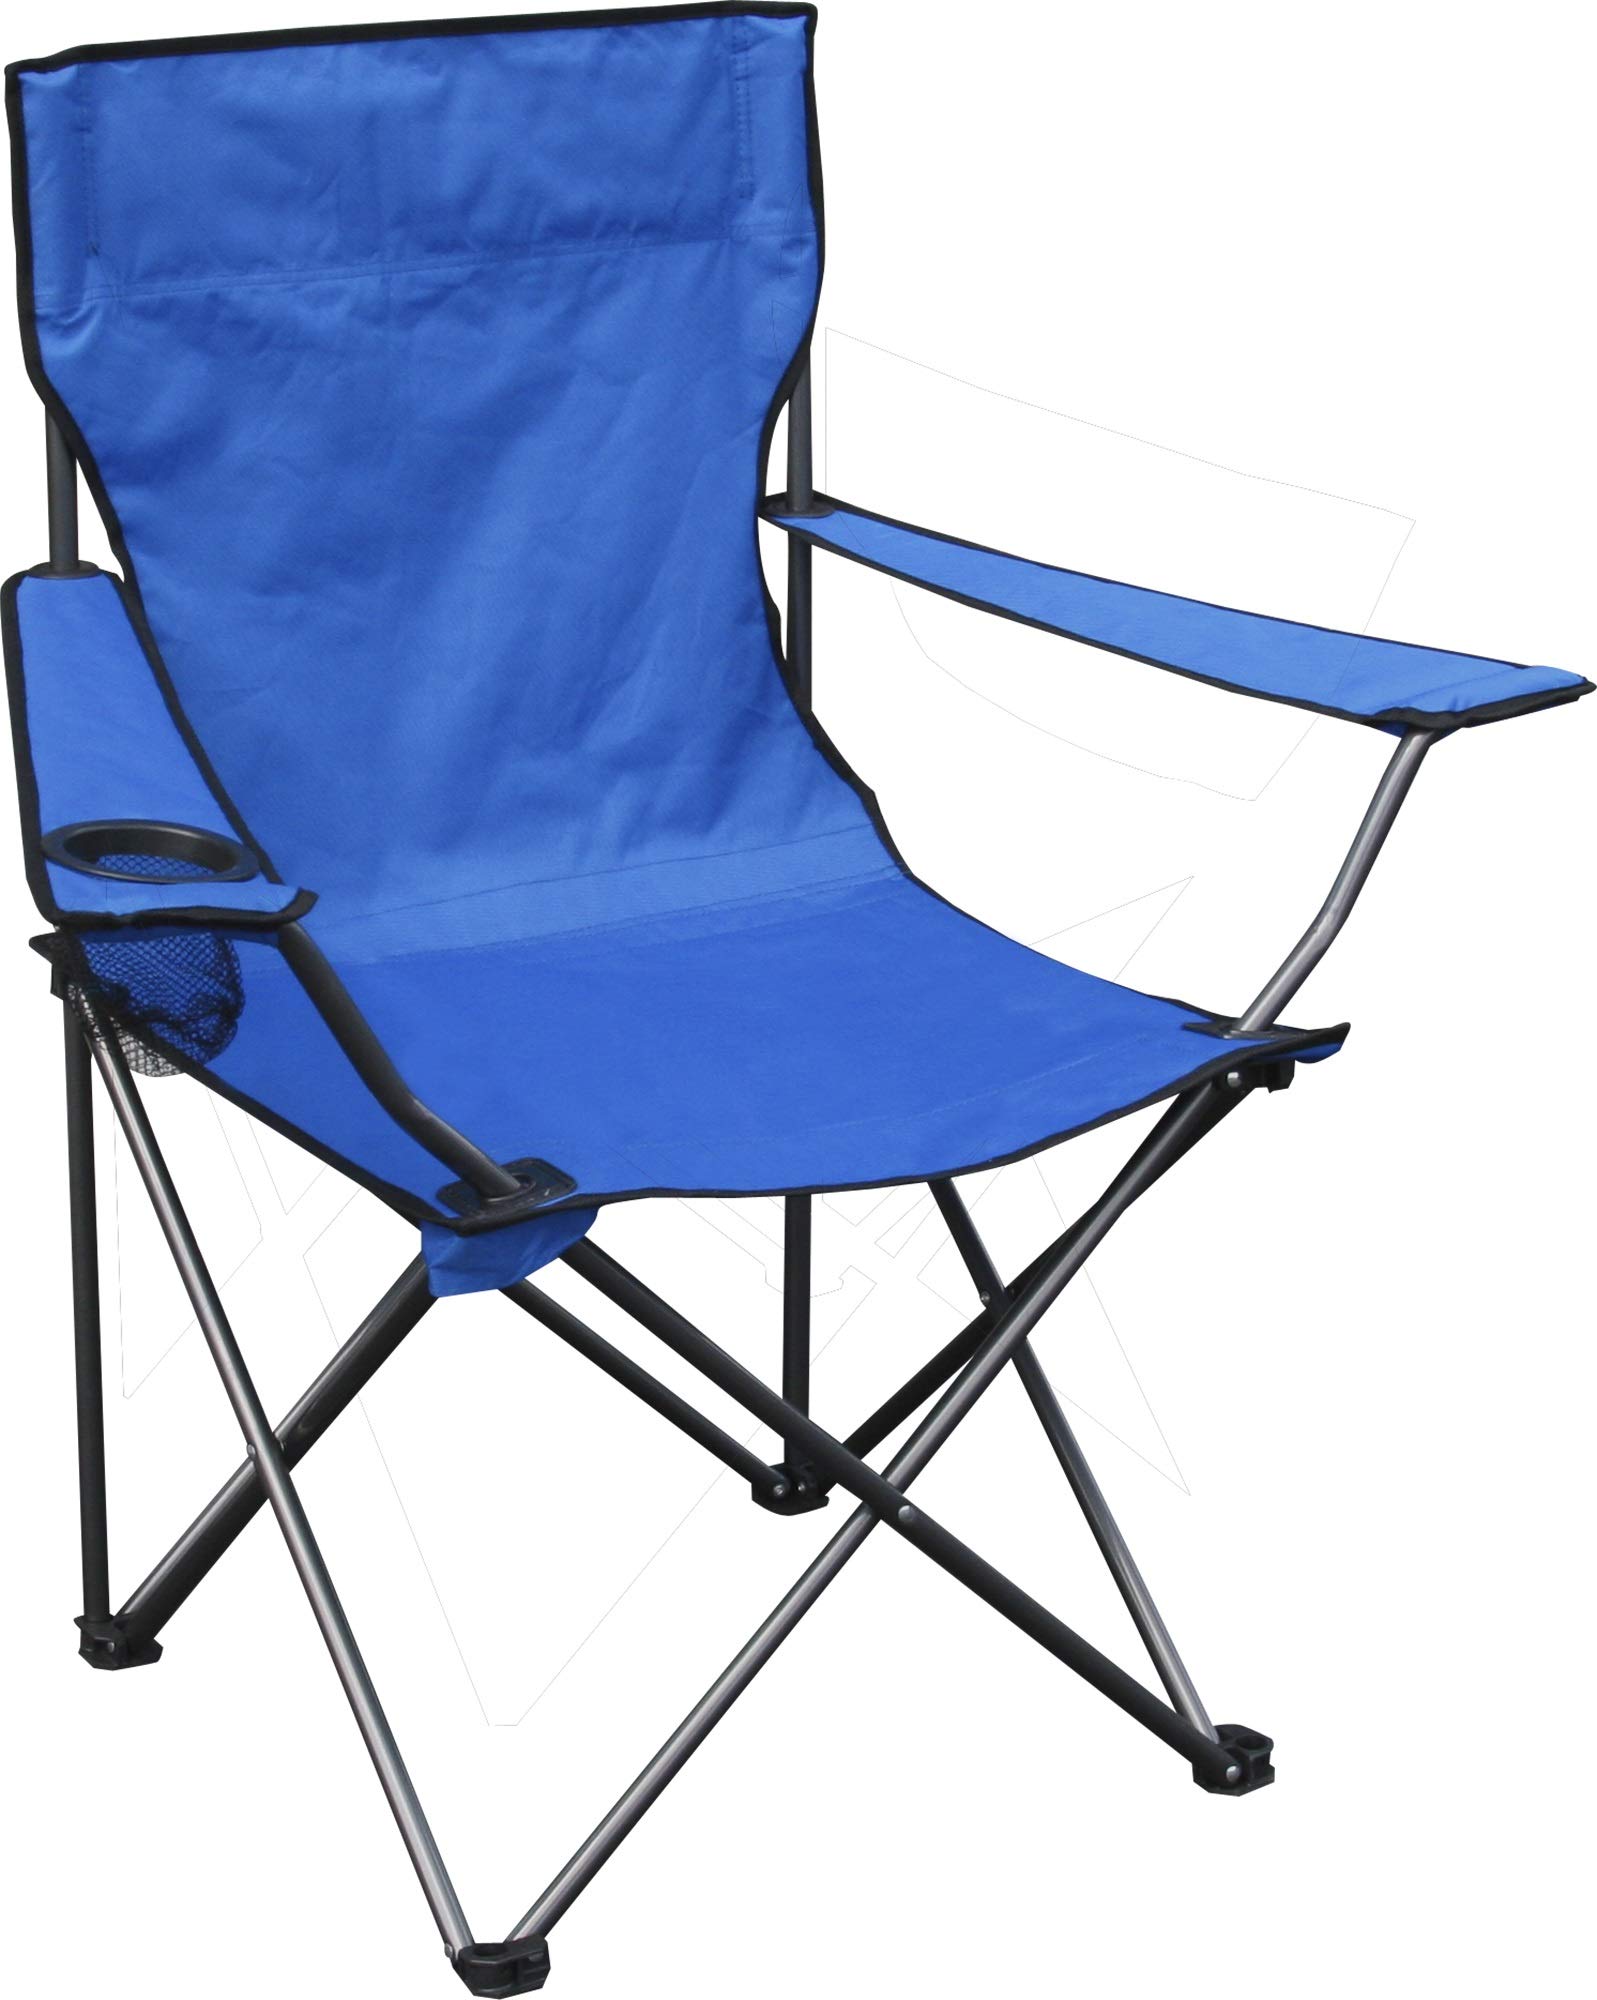 Quik Shade Quik Chair Portable Folding Chair with Arm Rest Cup Holder and Carrying and Storage Bag, Blue